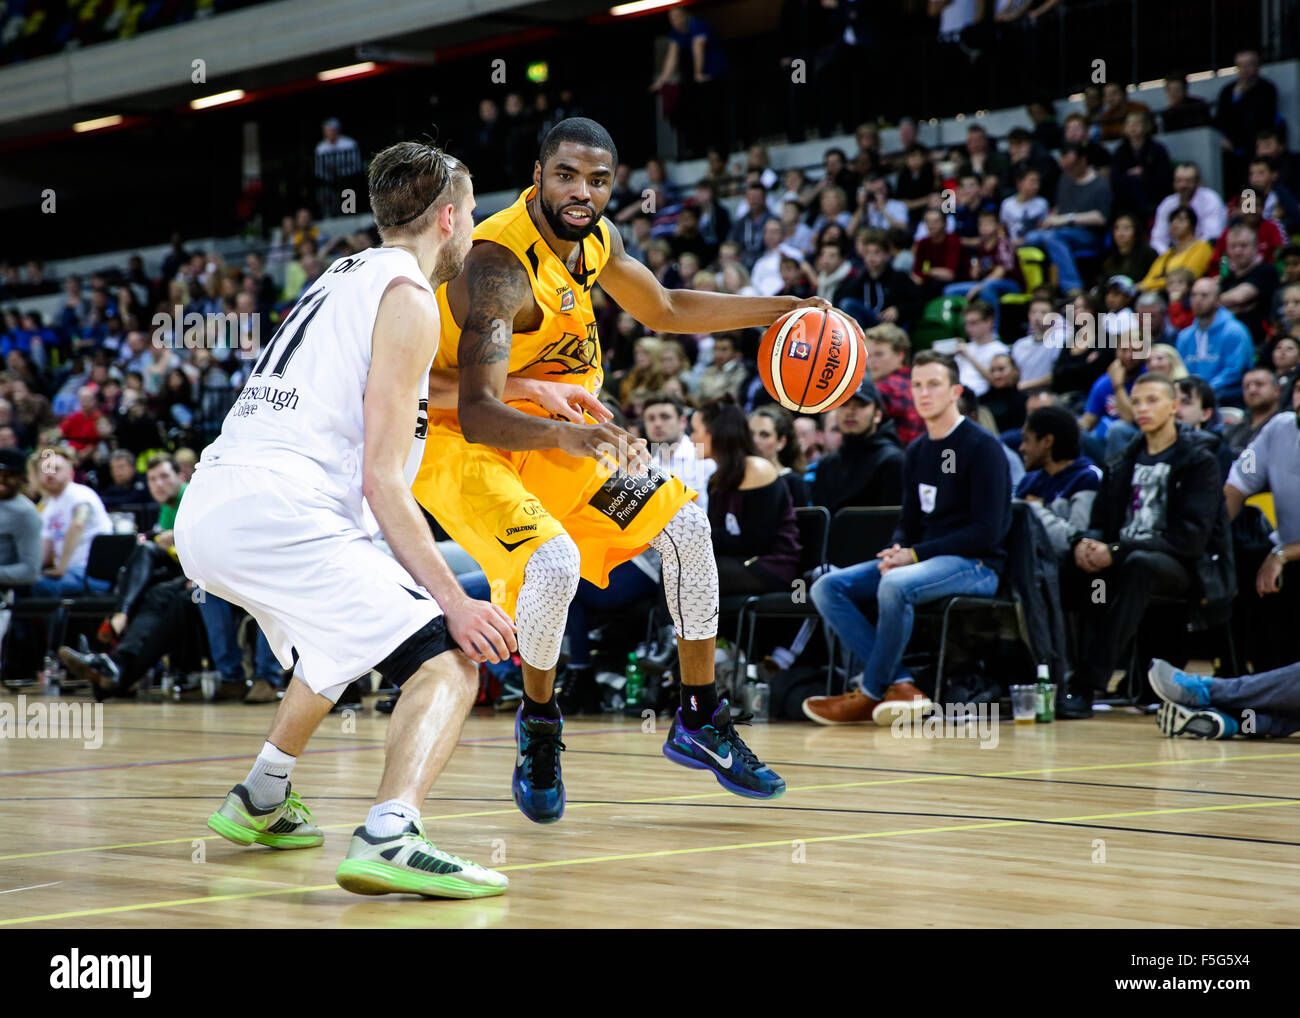 London UK. 29th October, 2015. Lions' Jaron Lane with the ball. London Lions vs Manchester Giants BBL game at the Copper Box Are Stock Photo